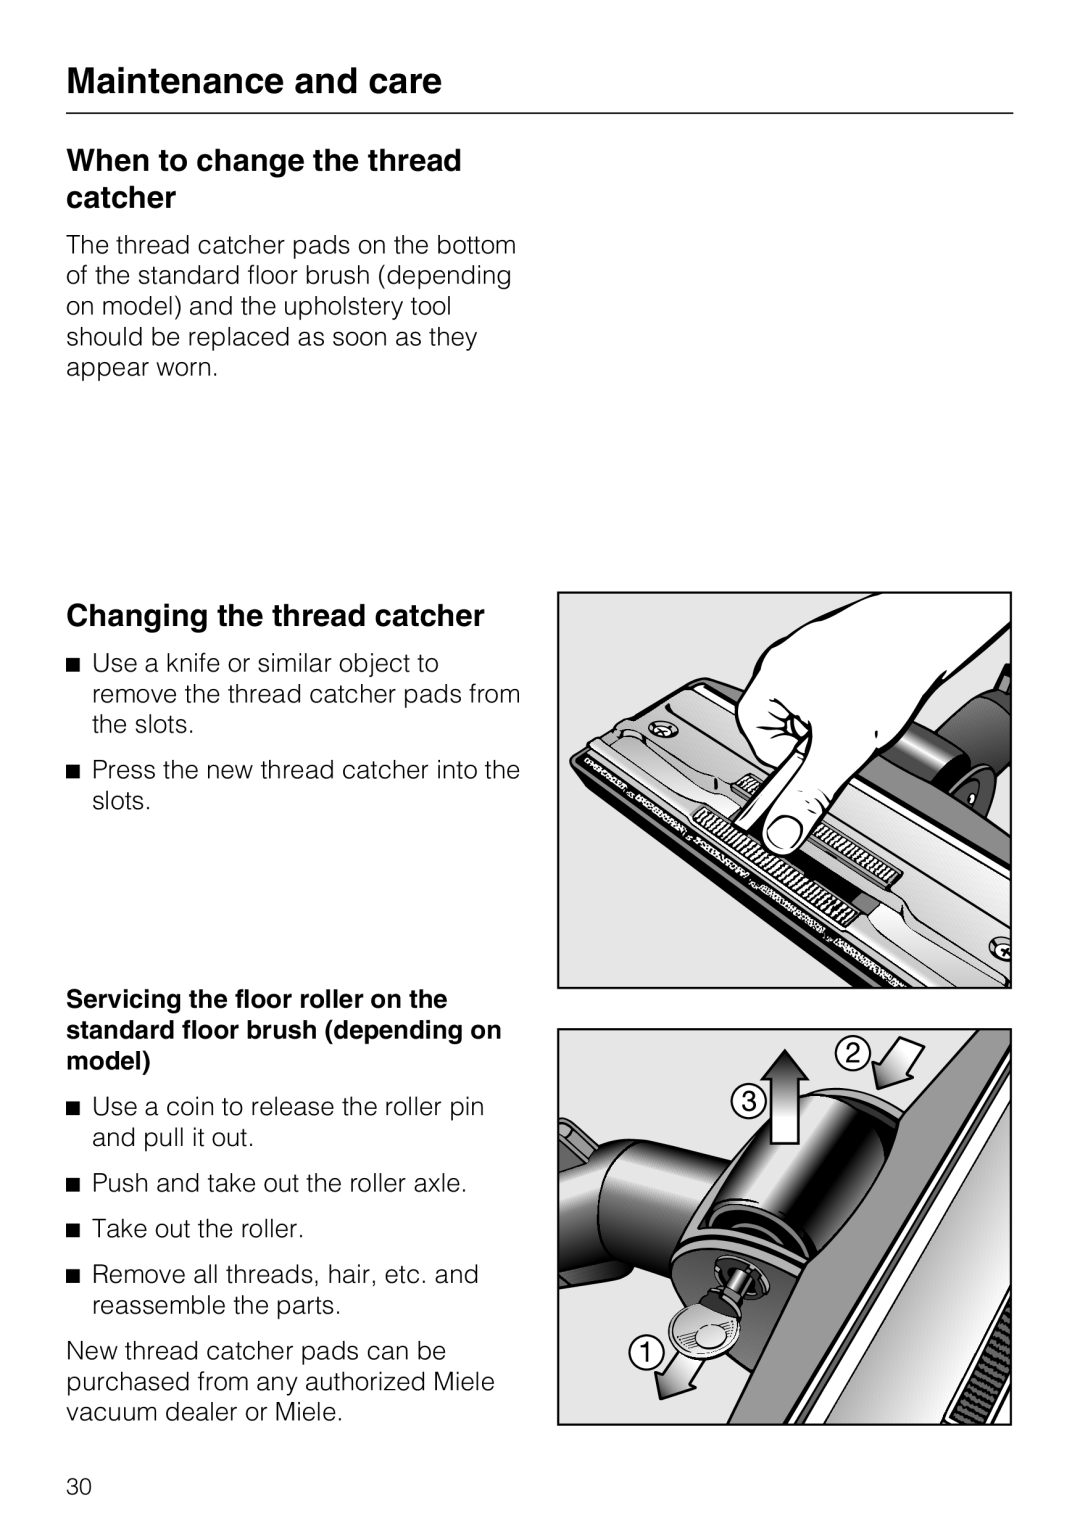 Miele S 5981 manual When to change the thread catcher, Changing the thread catcher, Maintenance and care 